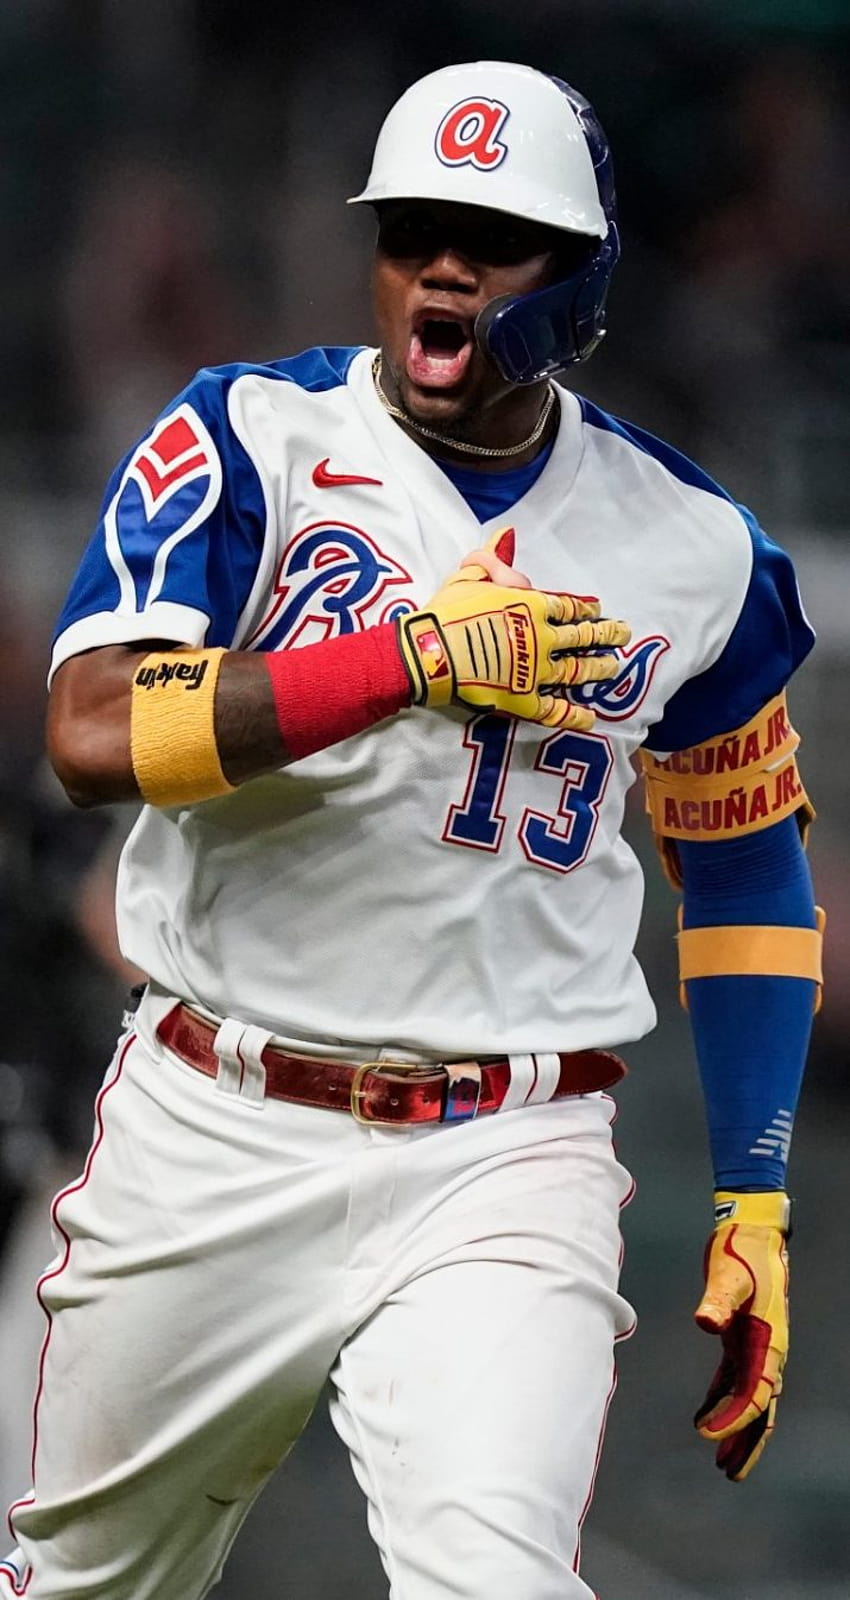 RBI Game  Need a new wallpaper Ronald Acuña Jr has you covered RBIGAME  WallpaperWednesday  Facebook